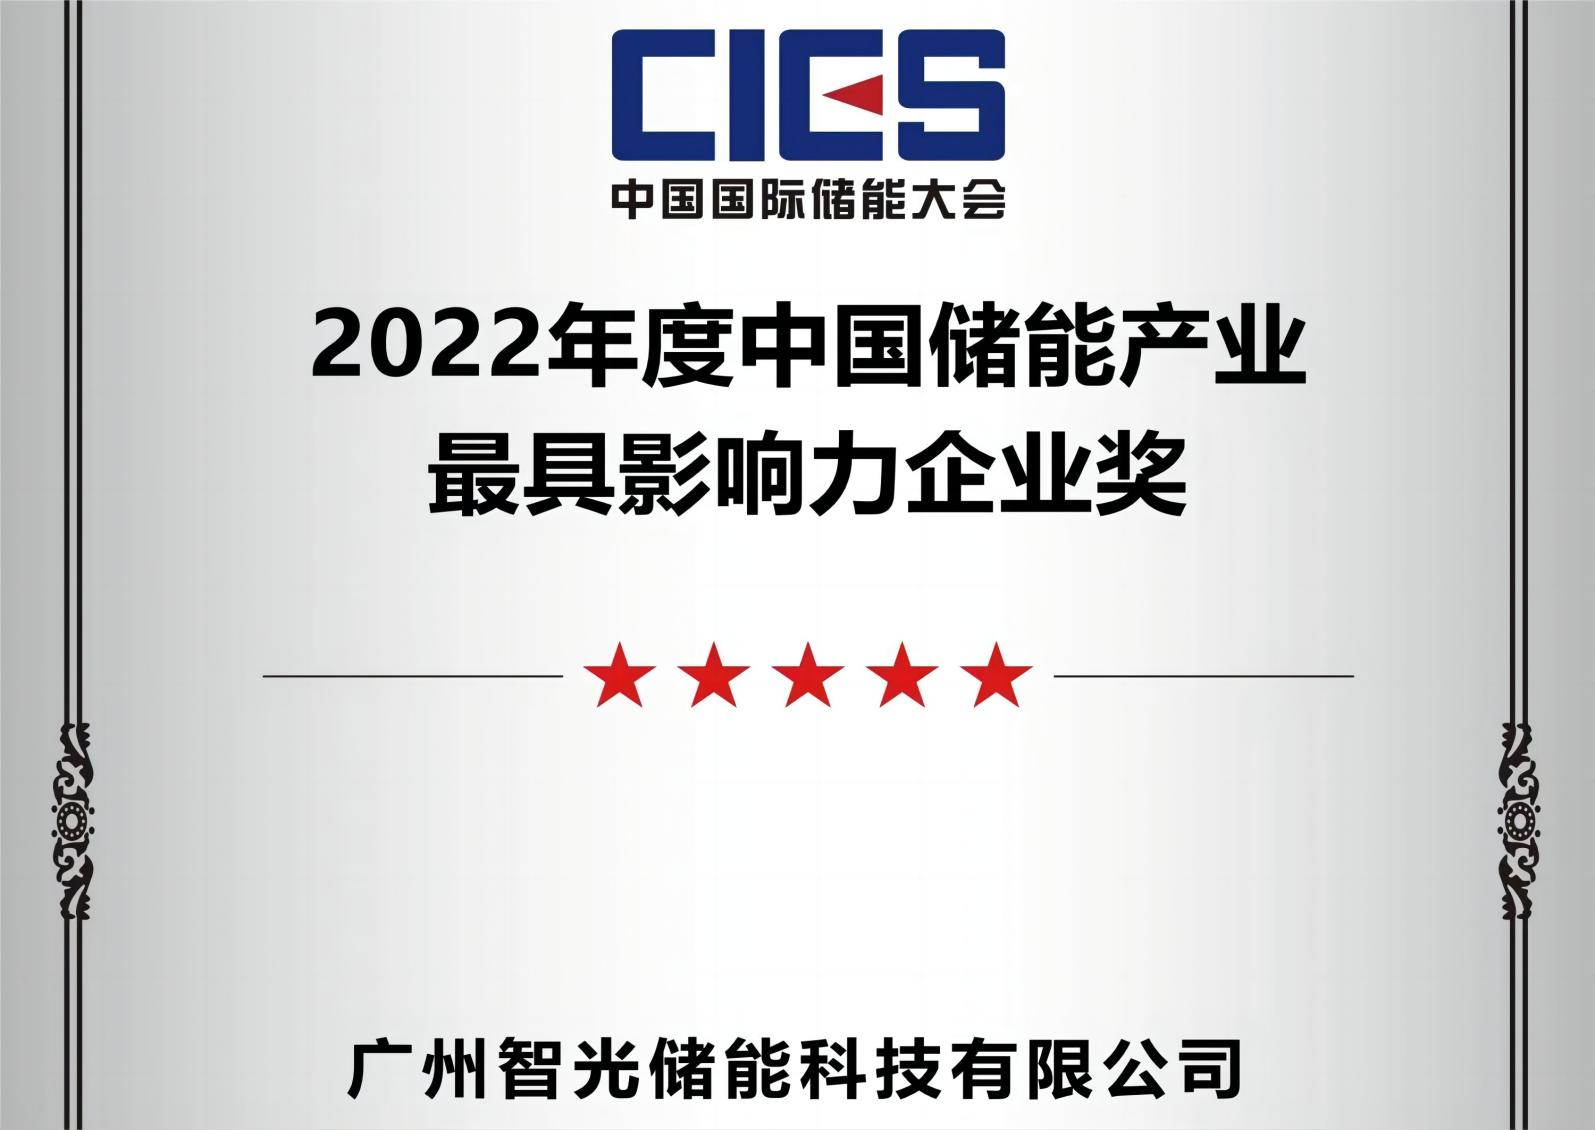 2022 The Most Influential Enterprise Award in China's Energy Storage Industry